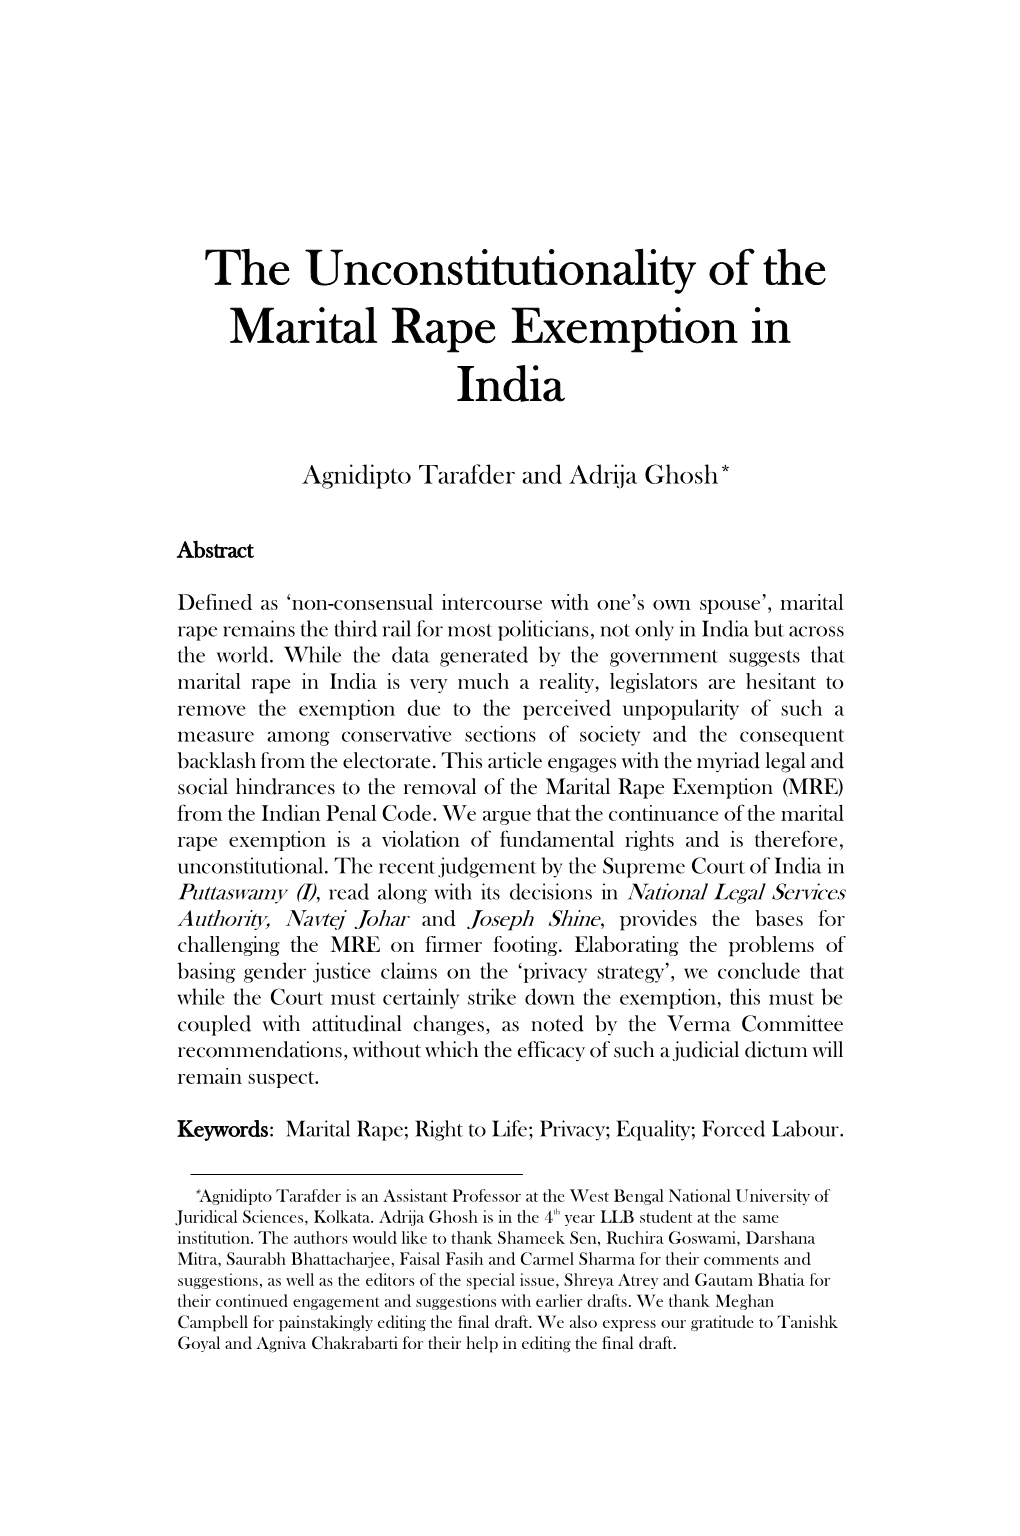 The Unconstitutionality of the Marital Rape Exemption in India